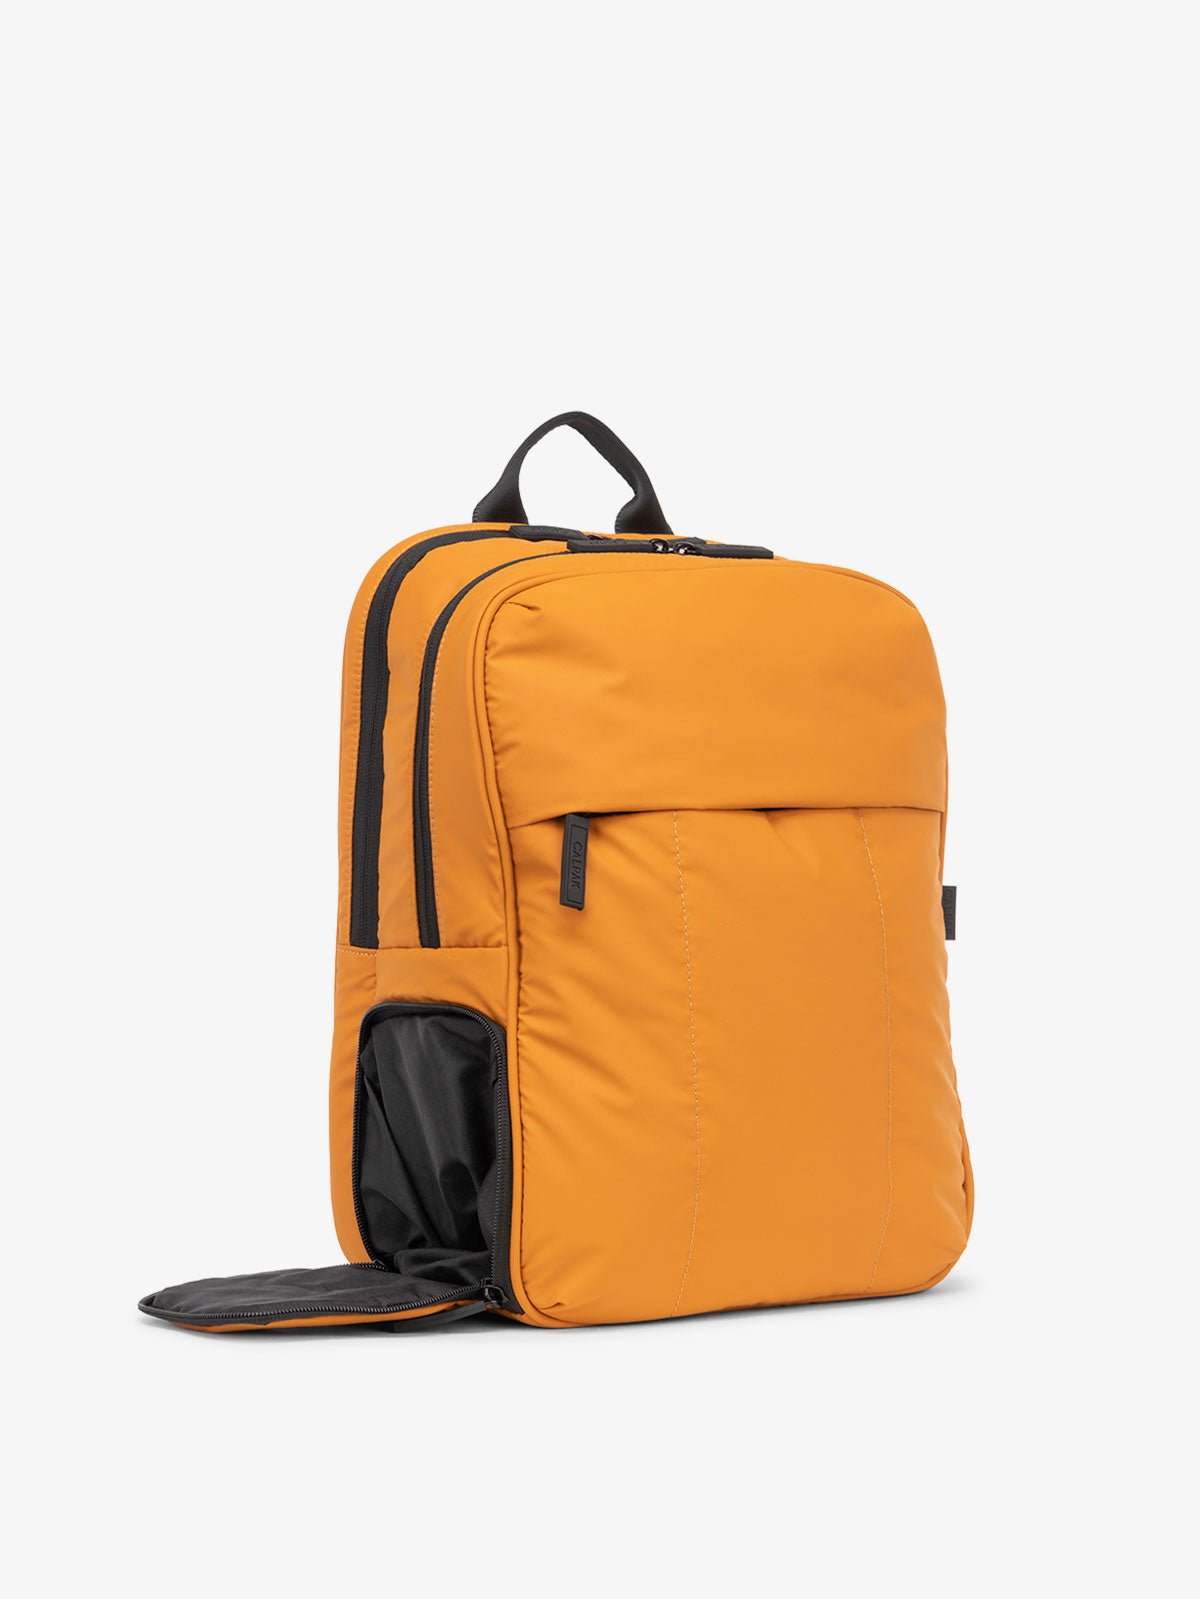 CALPAK Luka Laptop Backpack with shoe compartment in pumpkin